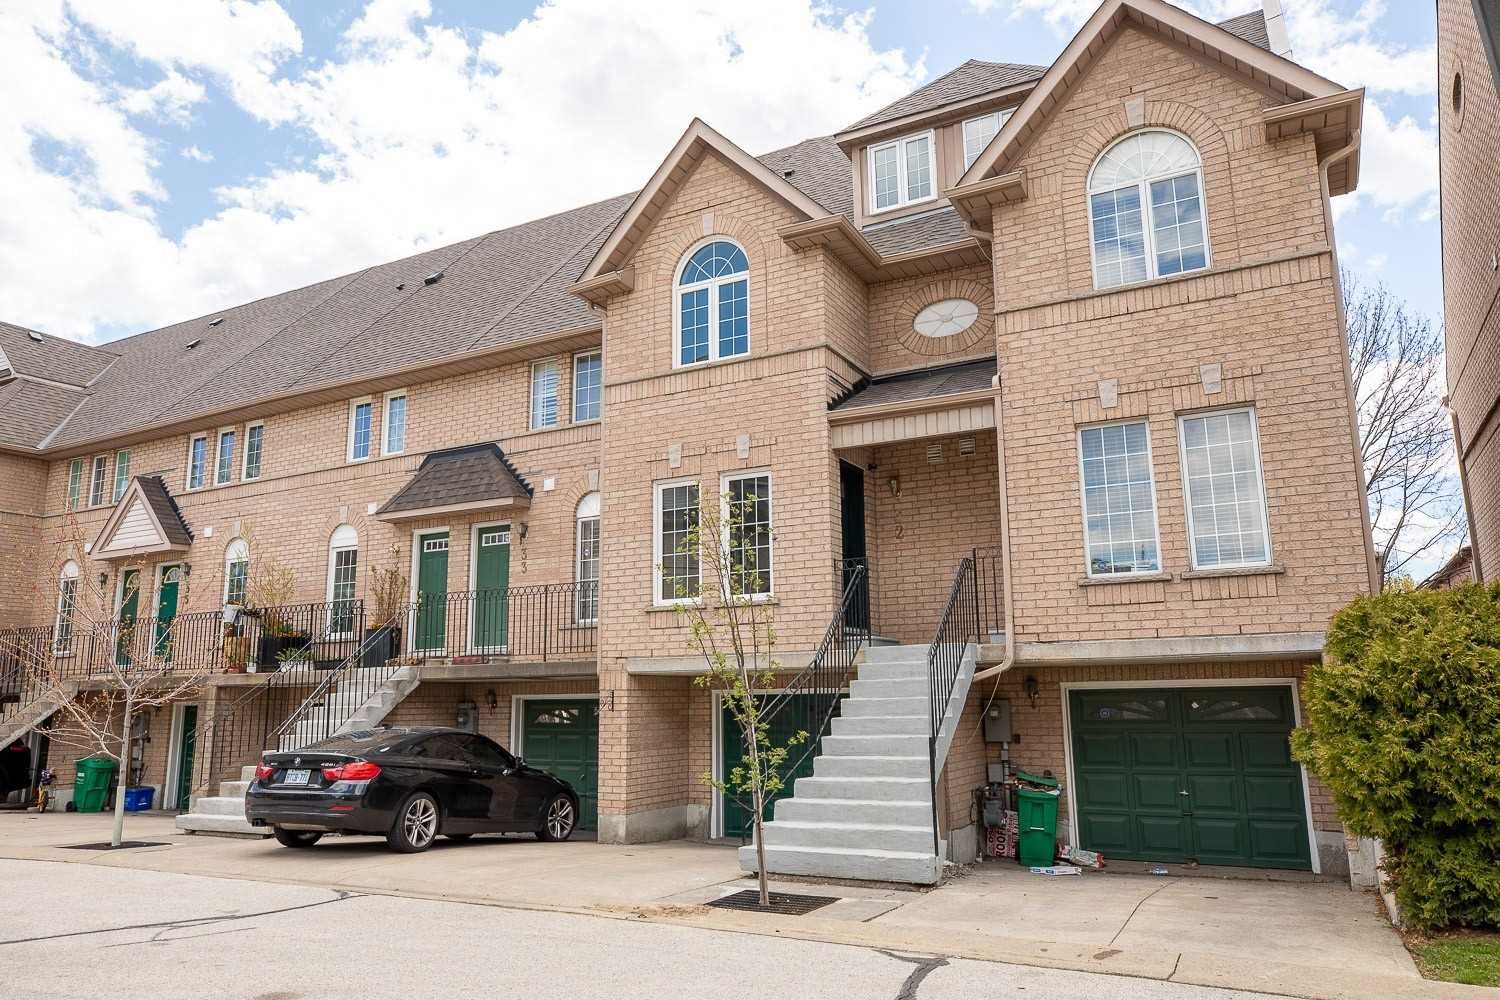 80 Strathaven Drive. 80 Strathaven Drive Townhomes is located in  Mississauga, Toronto - image #2 of 2